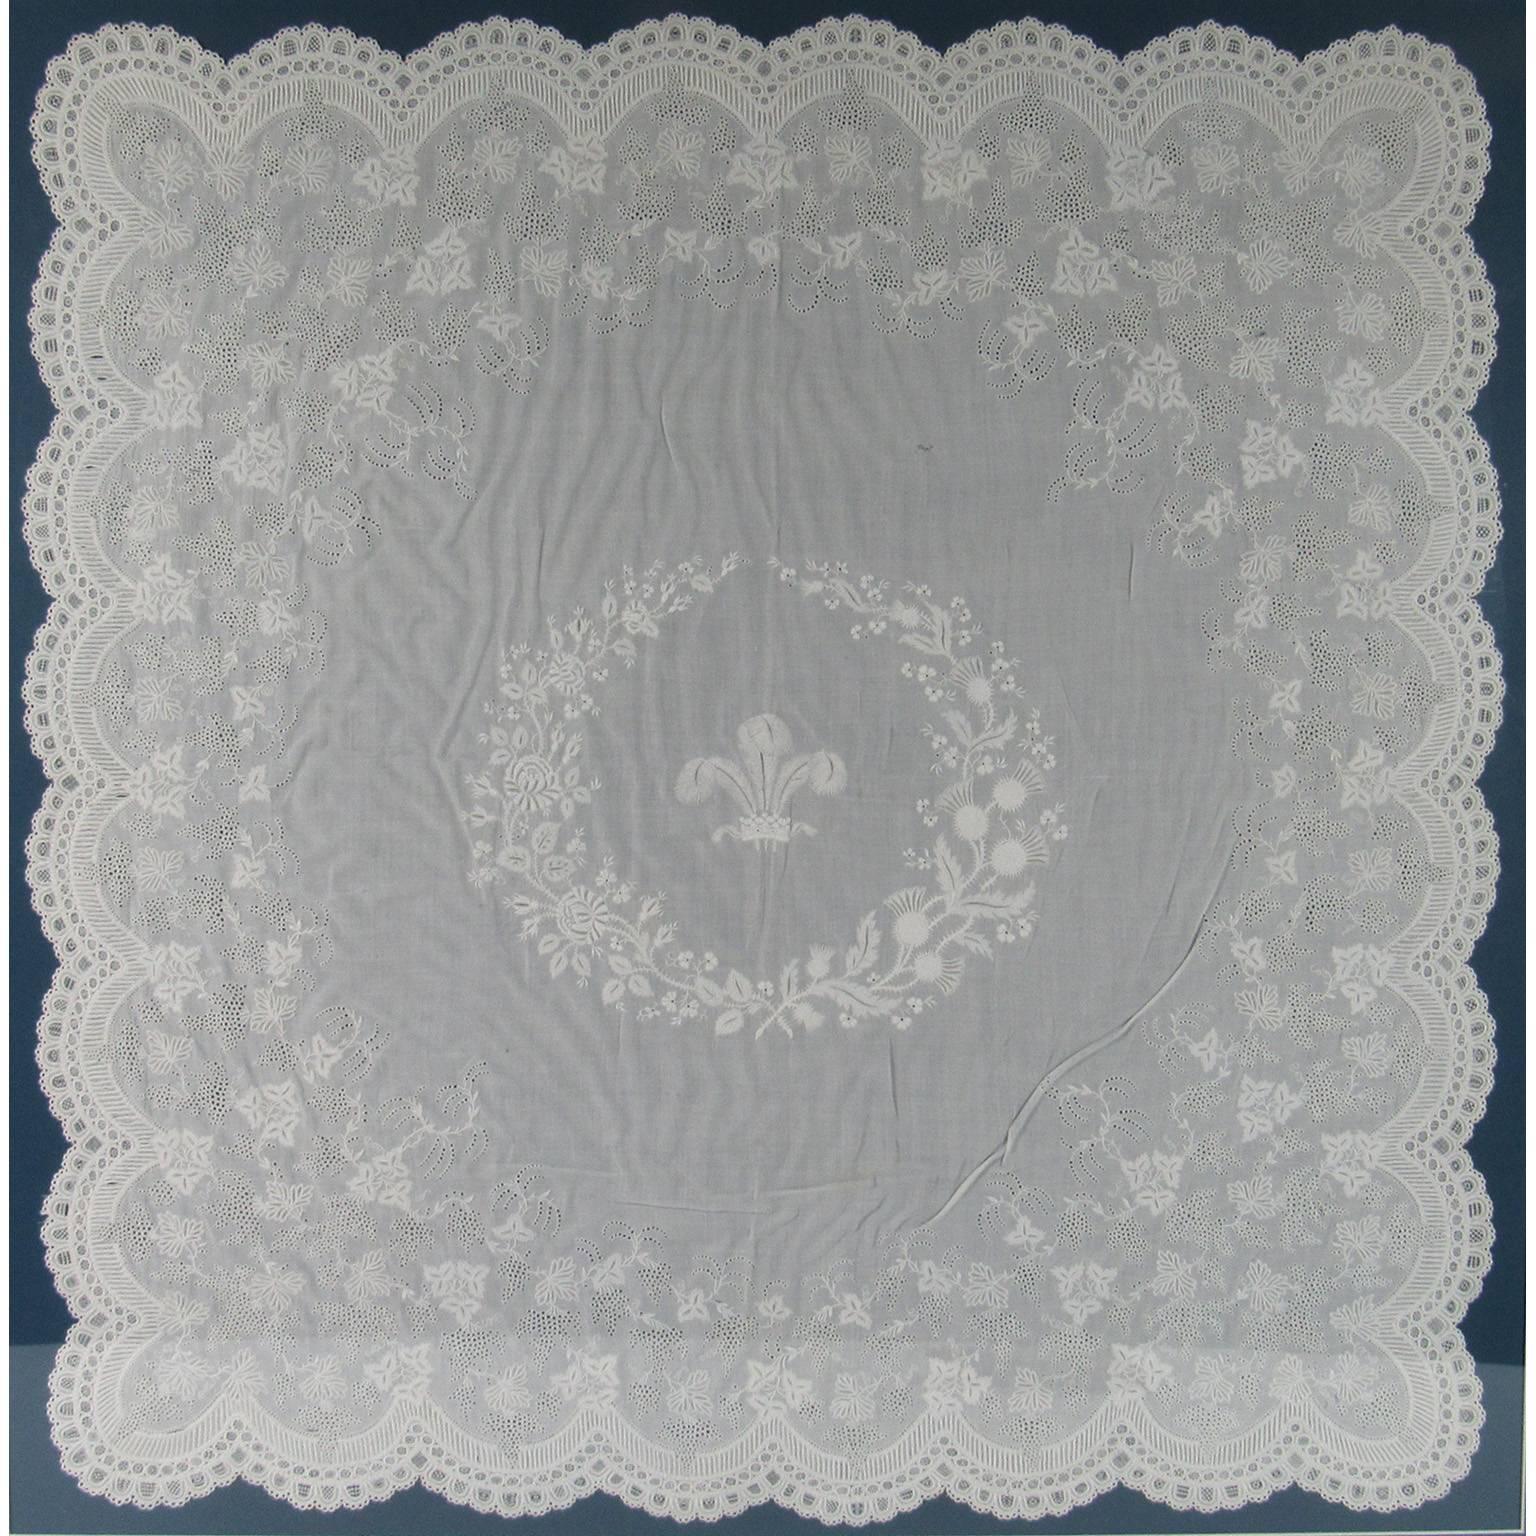 Fine 19th century antique linen embroidered table scarf, likely from Belgium or France. Incredibly detailed with scalloped edges and fleur des lis and floral design in center. Mounted to a blue mat and framed under glass for display. A wonderful